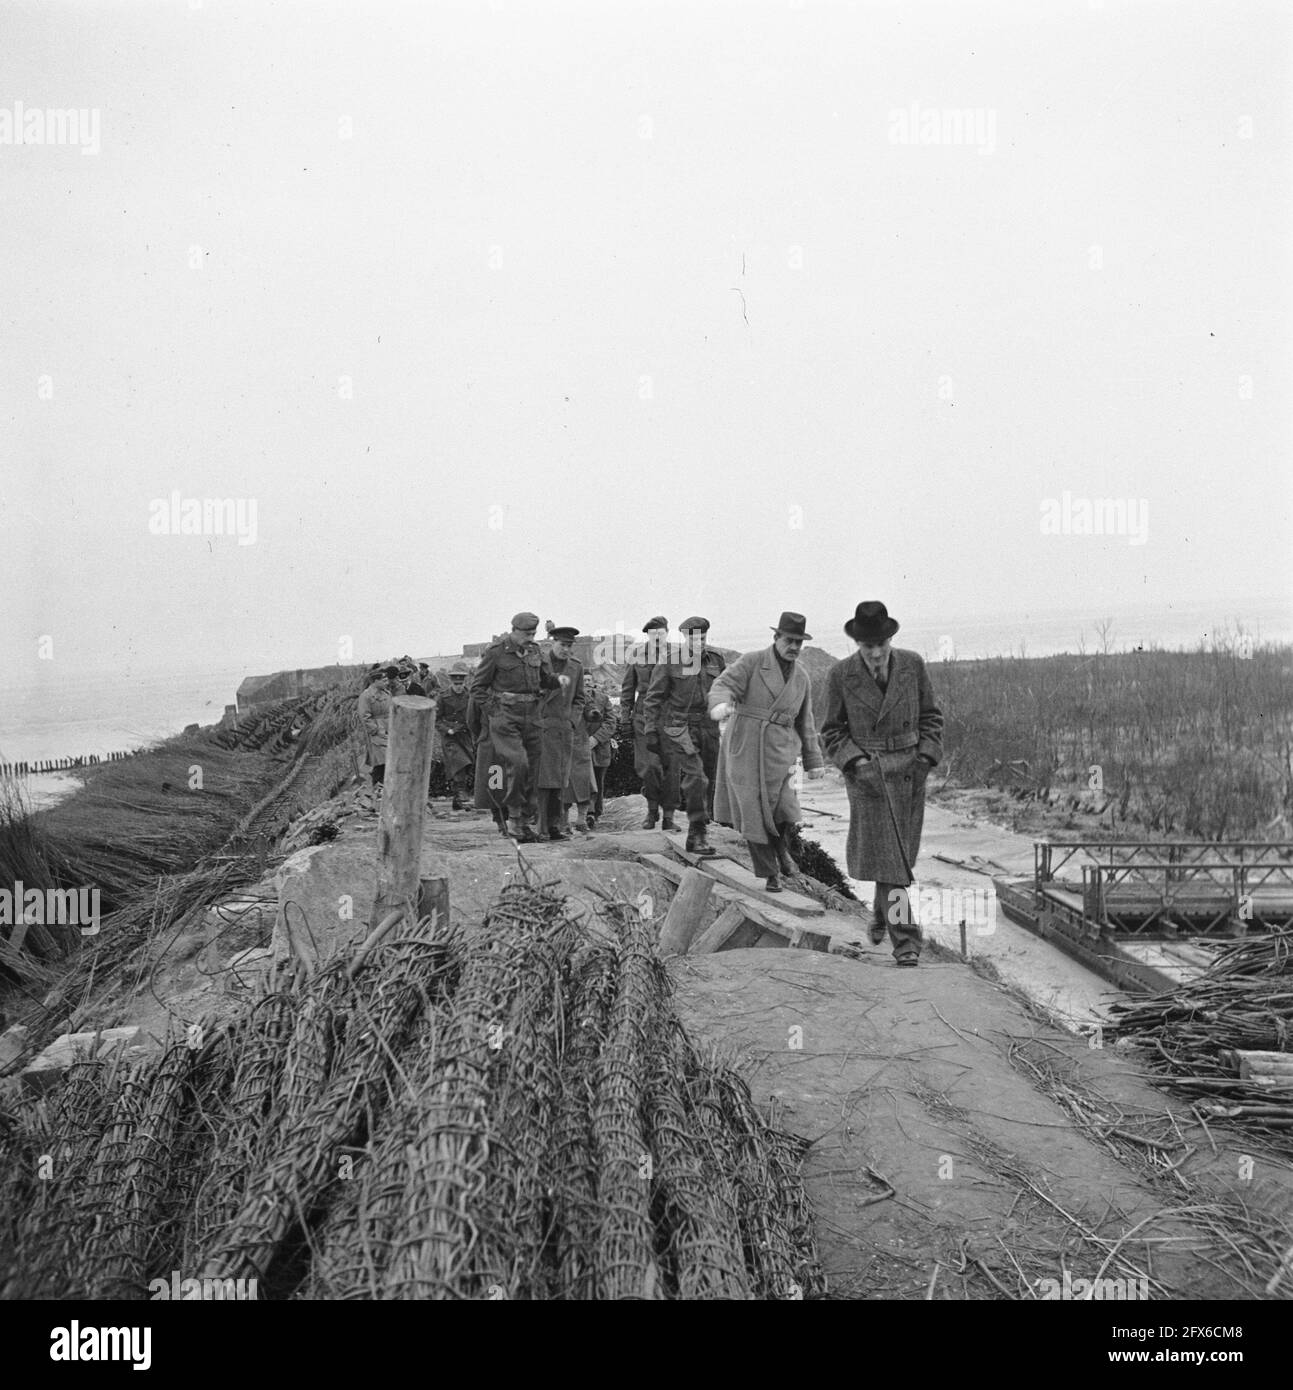 The company of military and civilian authorities during a walk along the destroyed coastal defenses, March 10, 1945, military, ministers, The Netherlands, 20th century press agency photo, news to remember, documentary, historic photography 1945-1990, visual stories, human history of the Twentieth Century, capturing moments in time Stock Photo